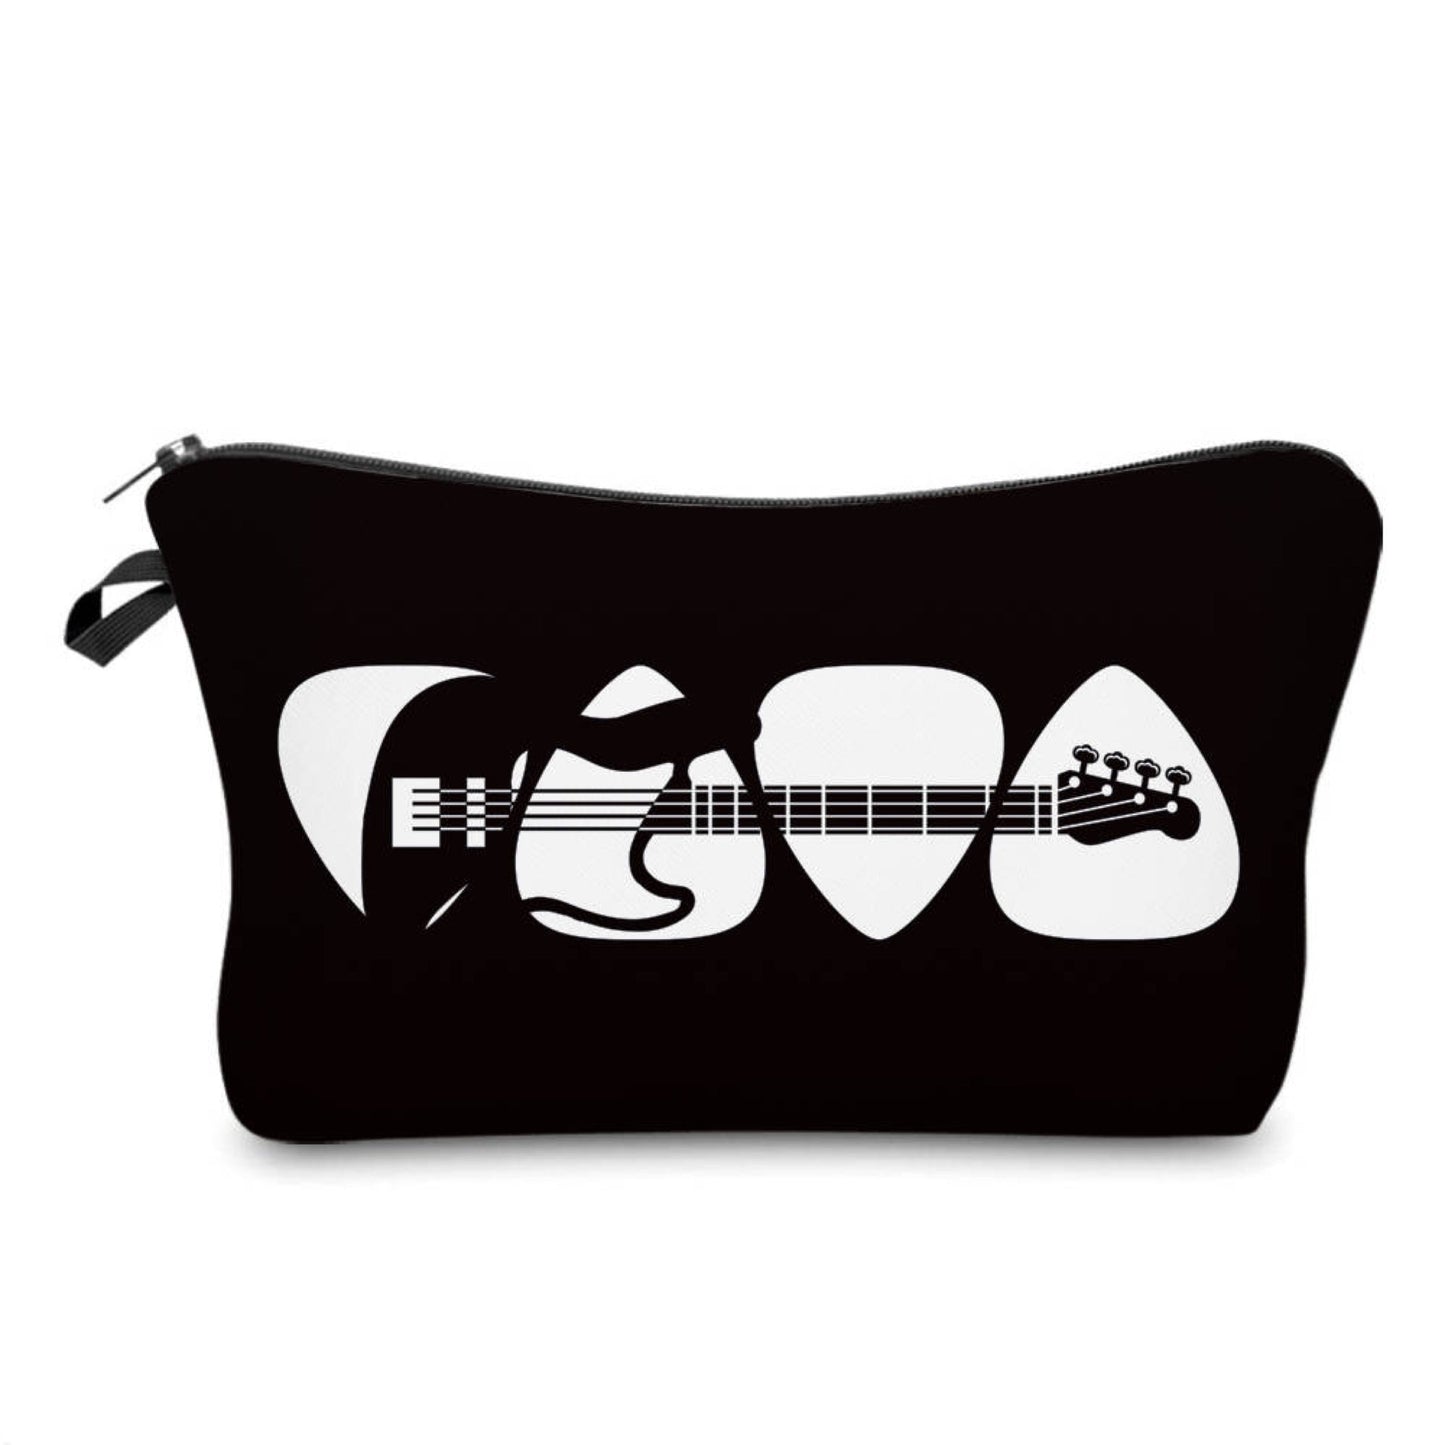 Guitar Picks - Water-Resistant Multi-Use Pouch